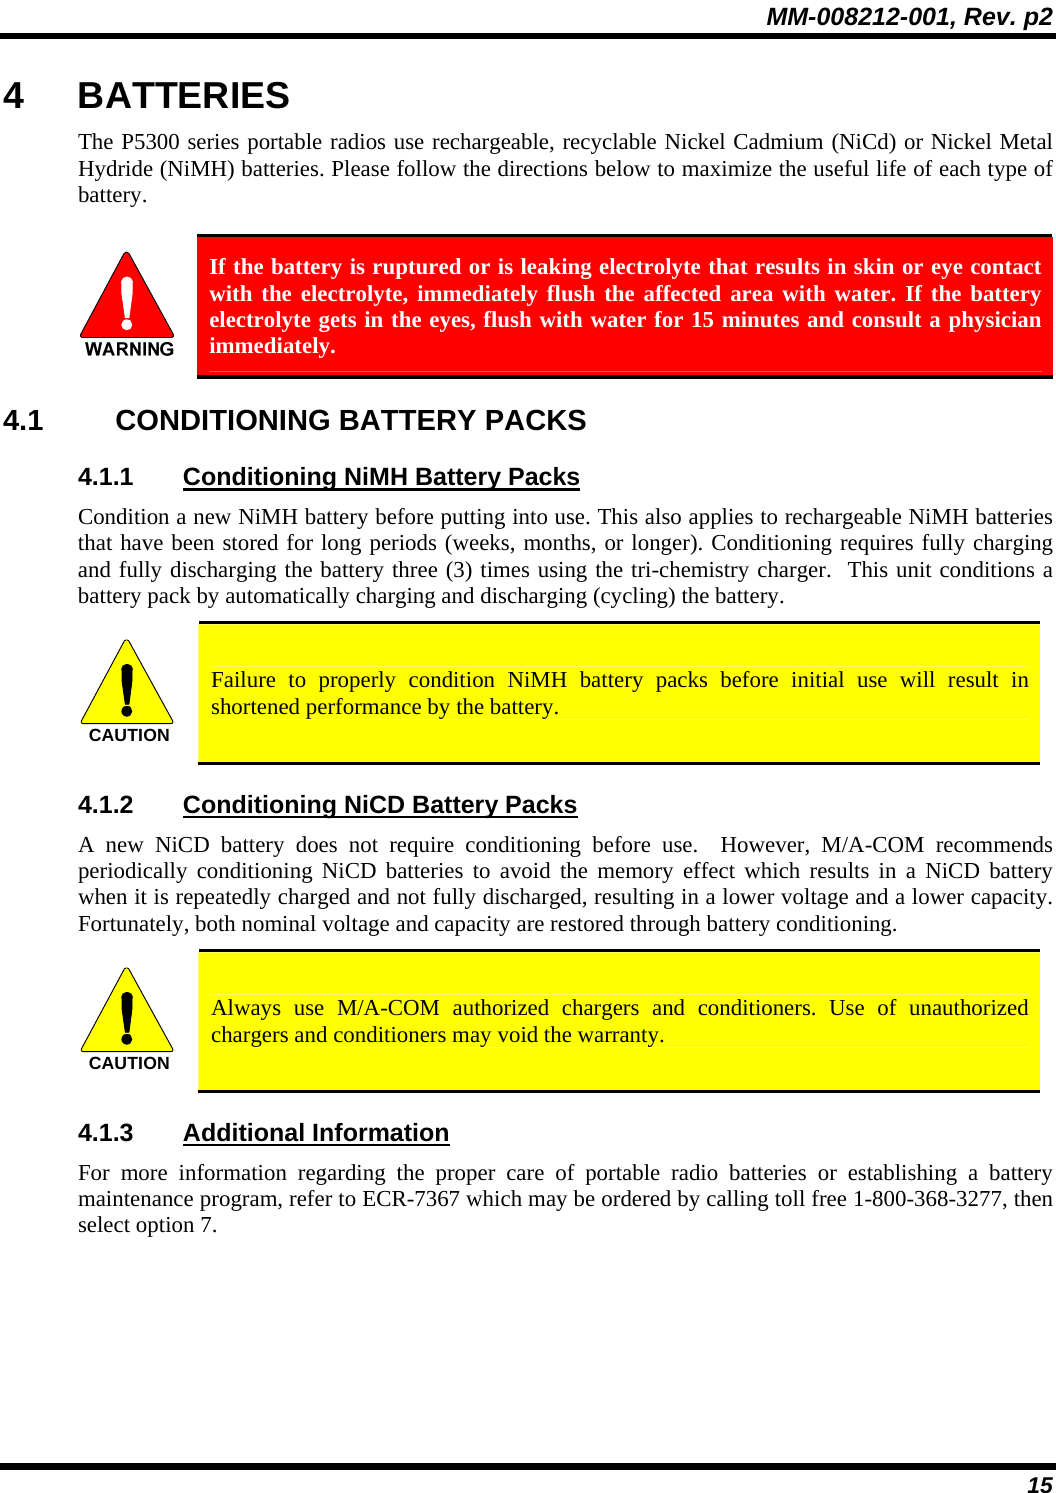 MM-008212-001, Rev. p2 15 4 BATTERIES The P5300 series portable radios use rechargeable, recyclable Nickel Cadmium (NiCd) or Nickel Metal Hydride (NiMH) batteries. Please follow the directions below to maximize the useful life of each type of battery.   If the battery is ruptured or is leaking electrolyte that results in skin or eye contact with the electrolyte, immediately flush the affected area with water. If the battery electrolyte gets in the eyes, flush with water for 15 minutes and consult a physician immediately. 4.1 CONDITIONING BATTERY PACKS 4.1.1  Conditioning NiMH Battery Packs Condition a new NiMH battery before putting into use. This also applies to rechargeable NiMH batteries that have been stored for long periods (weeks, months, or longer). Conditioning requires fully charging and fully discharging the battery three (3) times using the tri-chemistry charger.  This unit conditions a battery pack by automatically charging and discharging (cycling) the battery.   CAUTION  Failure to properly condition NiMH battery packs before initial use will result in shortened performance by the battery. 4.1.2  Conditioning NiCD Battery Packs A new NiCD battery does not require conditioning before use.  However, M/A-COM recommends periodically conditioning NiCD batteries to avoid the memory effect which results in a NiCD battery when it is repeatedly charged and not fully discharged, resulting in a lower voltage and a lower capacity. Fortunately, both nominal voltage and capacity are restored through battery conditioning.    CAUTION  Always use M/A-COM authorized chargers and conditioners. Use of unauthorized chargers and conditioners may void the warranty. 4.1.3 Additional Information For more information regarding the proper care of portable radio batteries or establishing a battery maintenance program, refer to ECR-7367 which may be ordered by calling toll free 1-800-368-3277, then select option 7. 